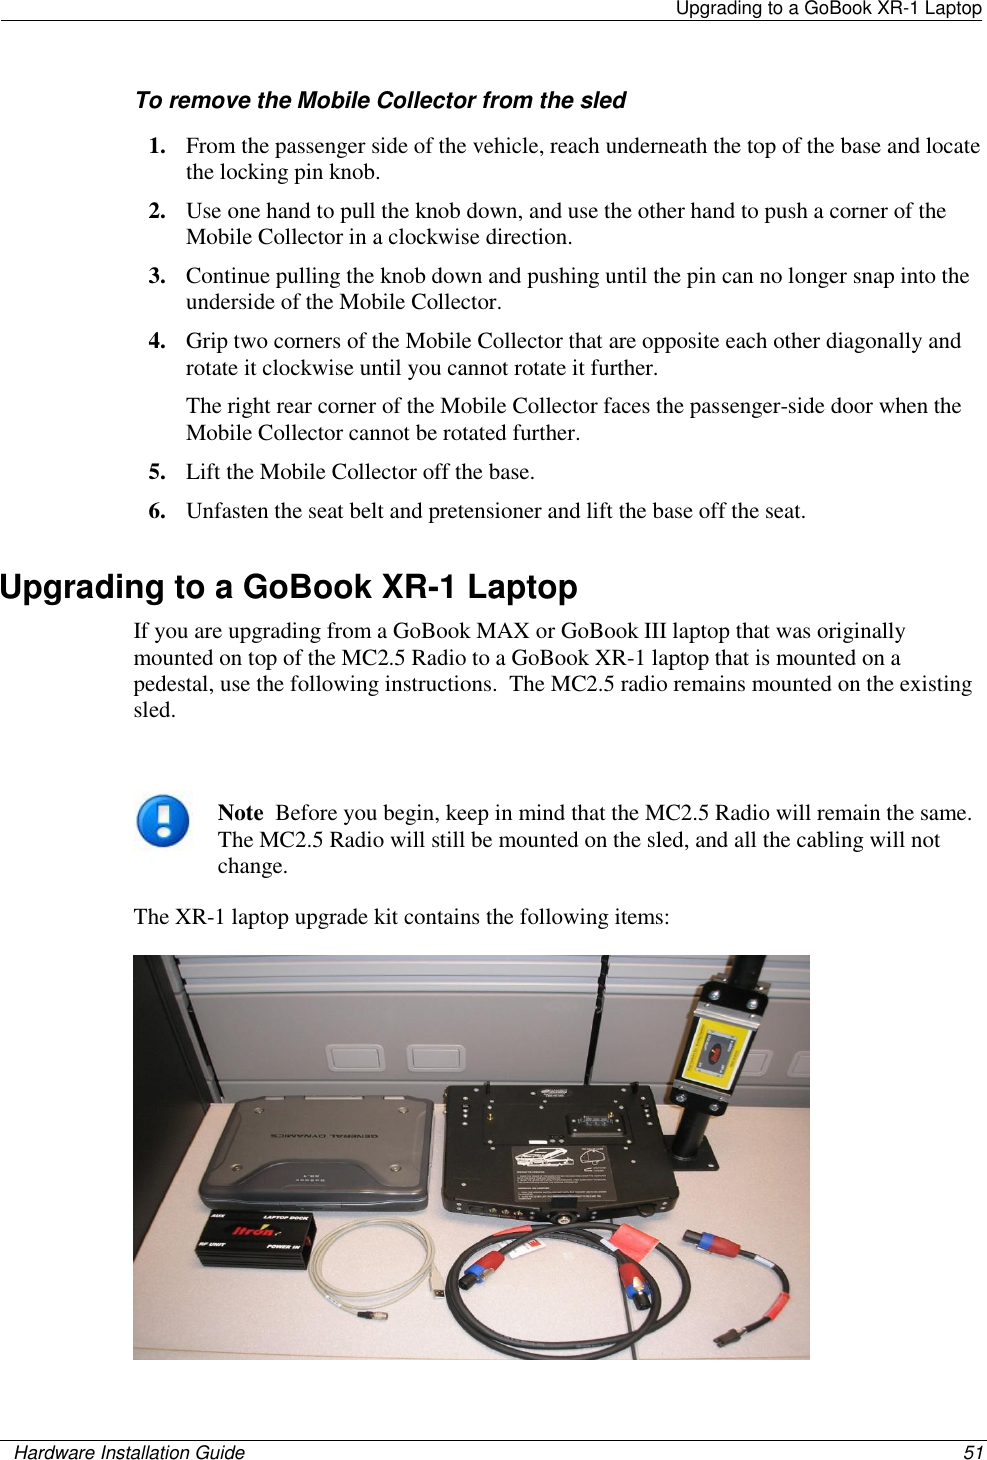   Upgrading to a GoBook XR-1 Laptop    Hardware Installation Guide  51  To remove the Mobile Collector from the sled 1. From the passenger side of the vehicle, reach underneath the top of the base and locate the locking pin knob. 2. Use one hand to pull the knob down, and use the other hand to push a corner of the Mobile Collector in a clockwise direction. 3. Continue pulling the knob down and pushing until the pin can no longer snap into the underside of the Mobile Collector. 4. Grip two corners of the Mobile Collector that are opposite each other diagonally and rotate it clockwise until you cannot rotate it further.  The right rear corner of the Mobile Collector faces the passenger-side door when the Mobile Collector cannot be rotated further. 5. Lift the Mobile Collector off the base. 6. Unfasten the seat belt and pretensioner and lift the base off the seat. Upgrading to a GoBook XR-1 Laptop If you are upgrading from a GoBook MAX or GoBook III laptop that was originally mounted on top of the MC2.5 Radio to a GoBook XR-1 laptop that is mounted on a pedestal, use the following instructions.  The MC2.5 radio remains mounted on the existing sled.   Note  Before you begin, keep in mind that the MC2.5 Radio will remain the same.  The MC2.5 Radio will still be mounted on the sled, and all the cabling will not change. The XR-1 laptop upgrade kit contains the following items:  